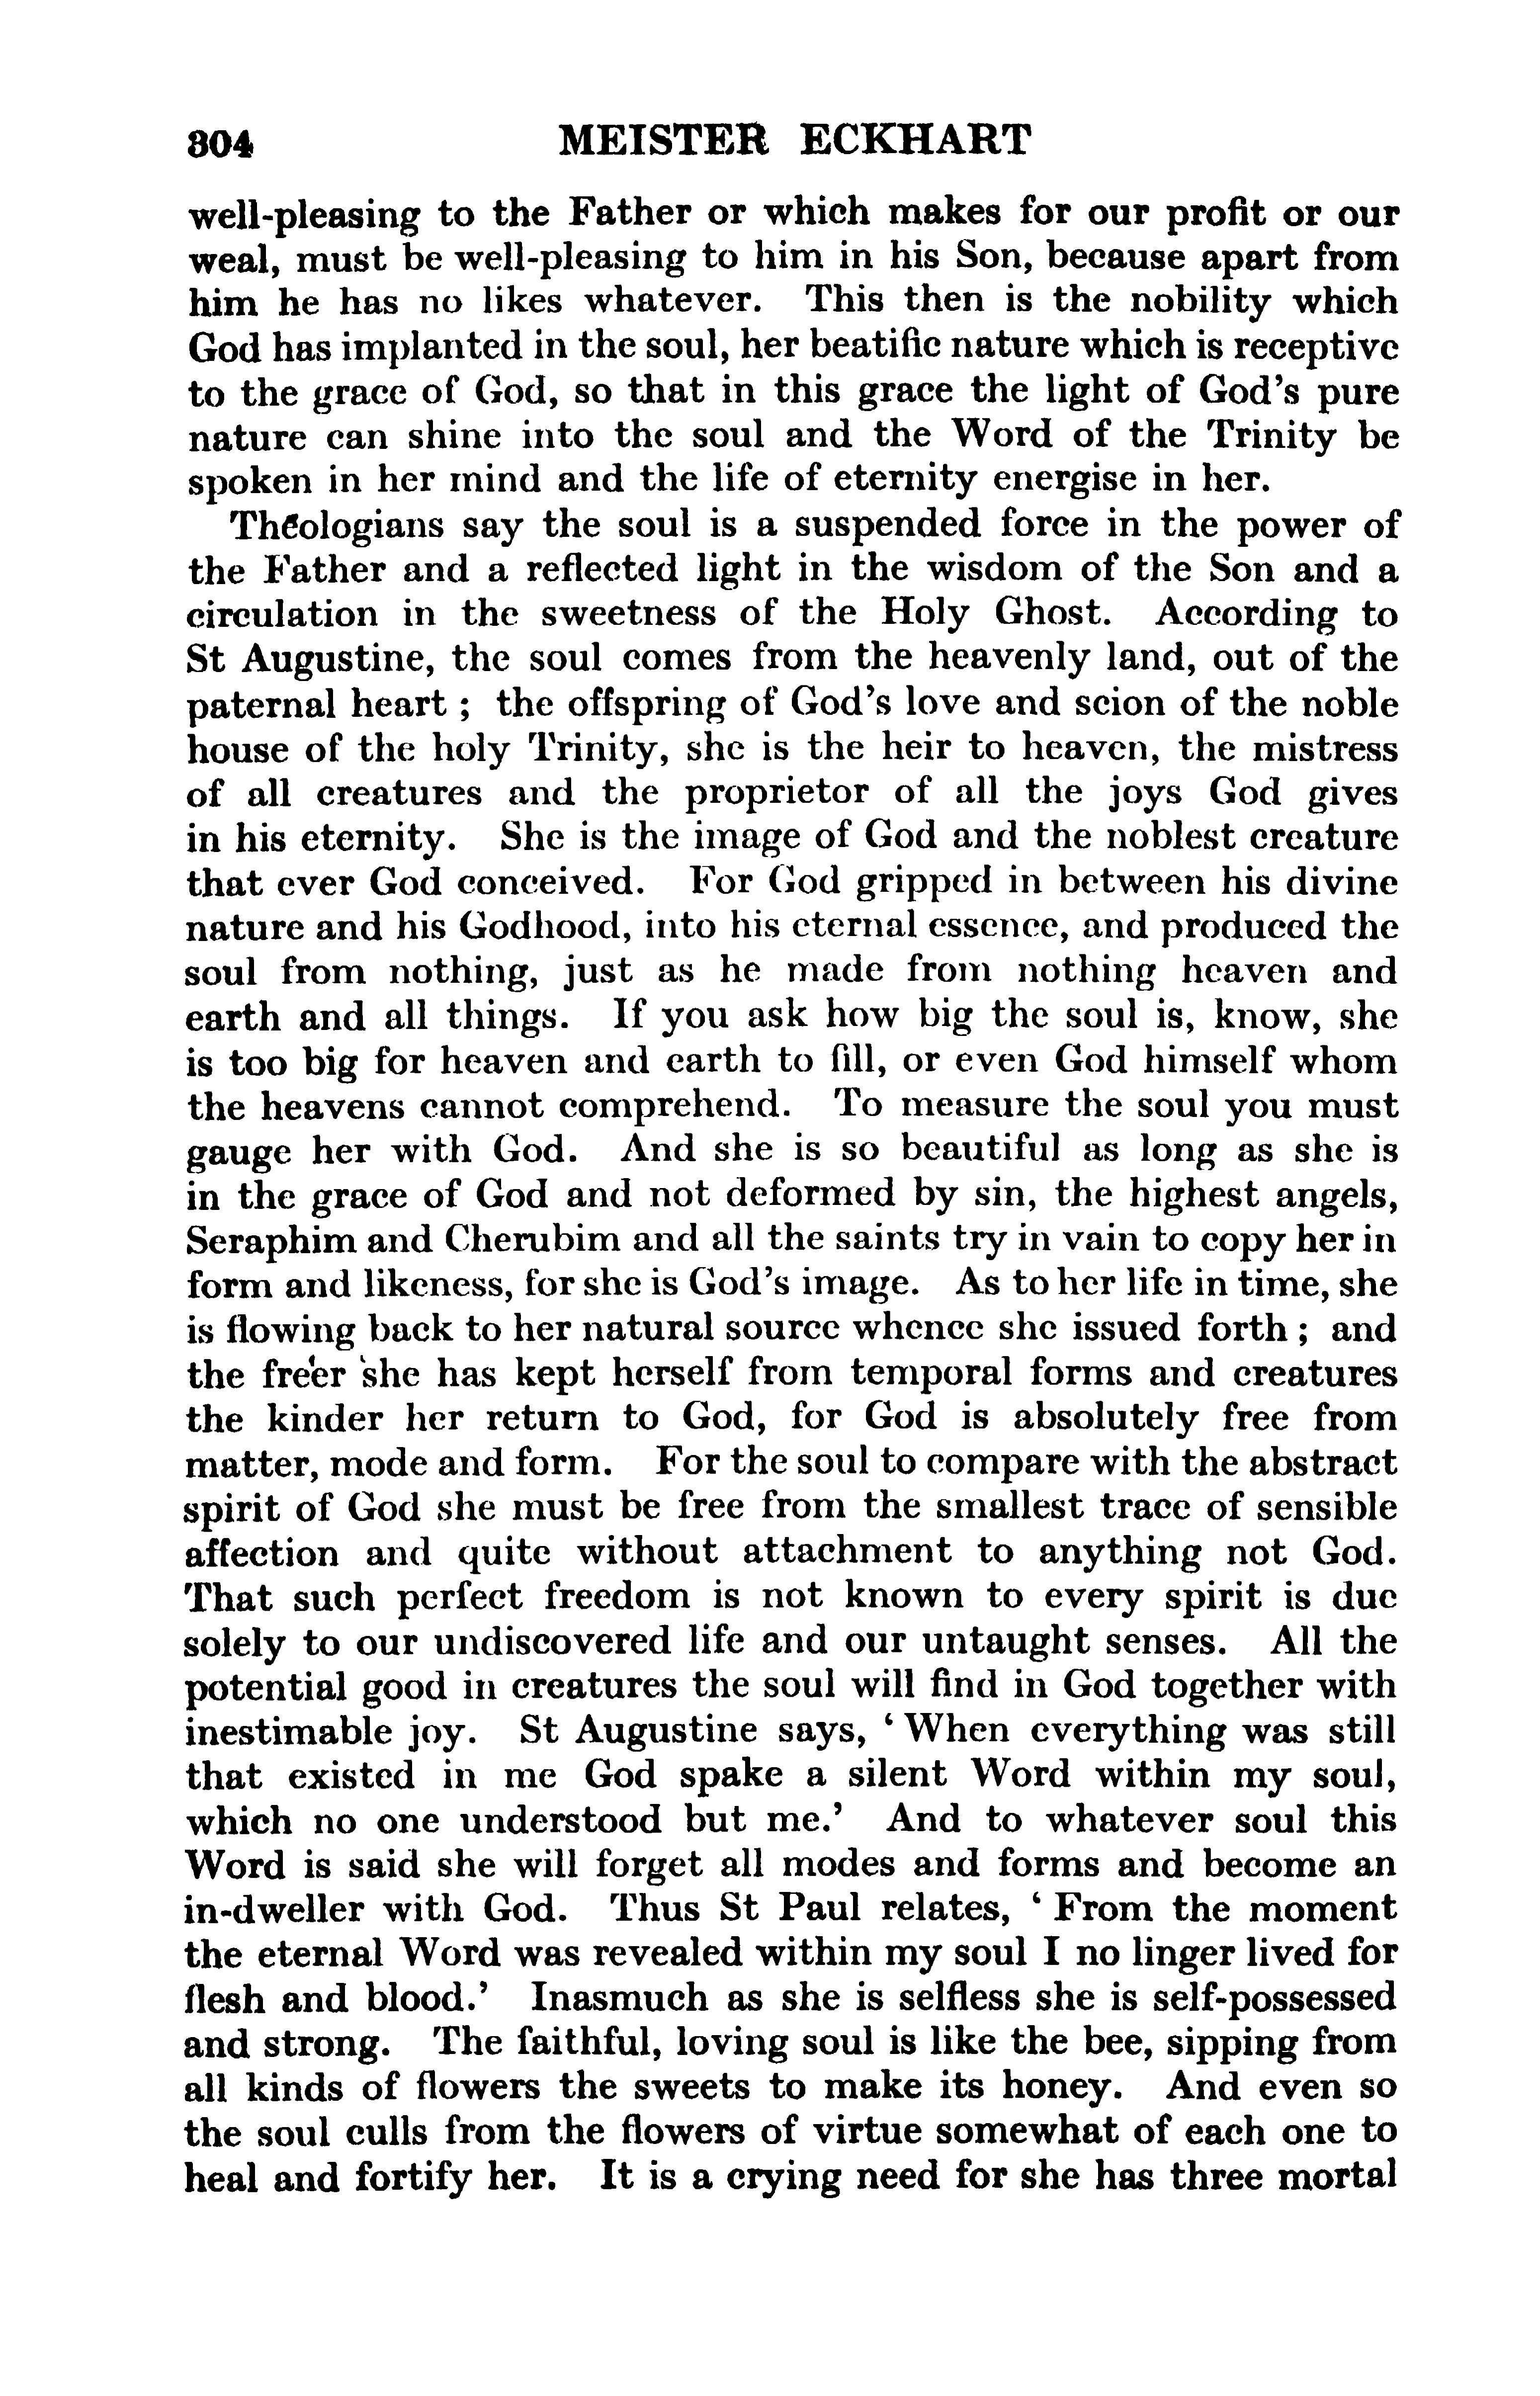 Image of page 0328